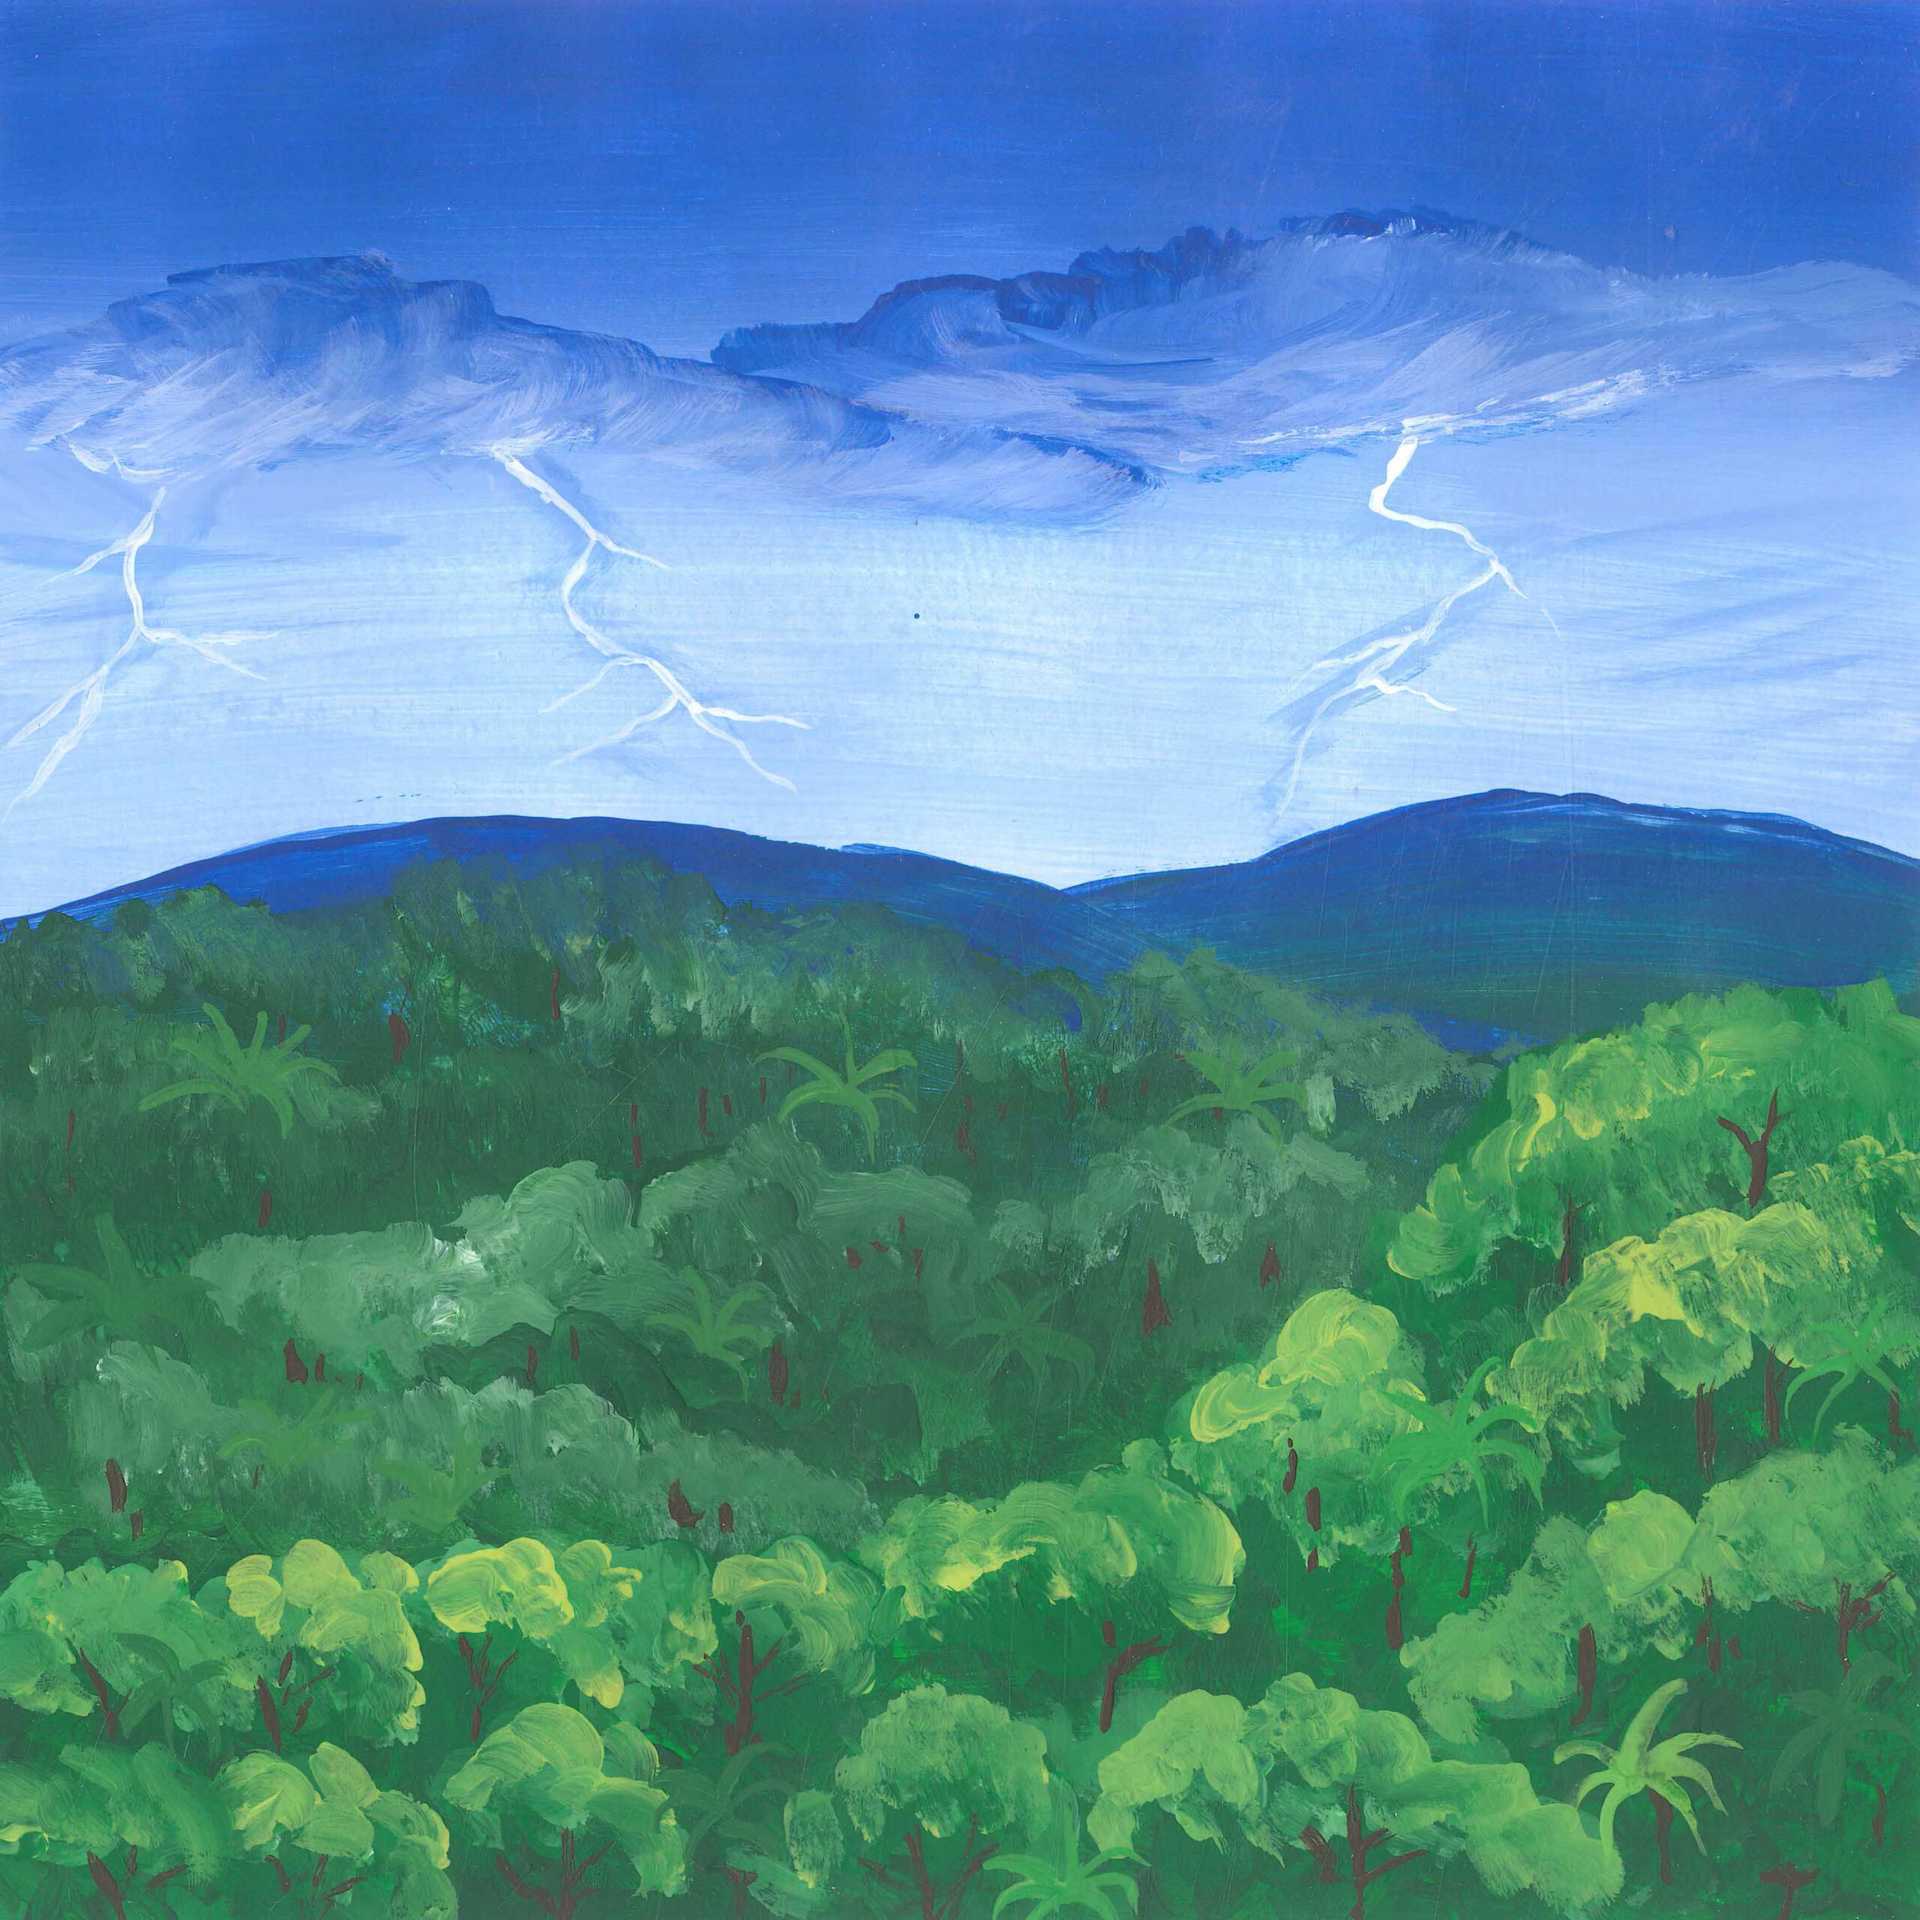 Thunderstorm at Dusk in the Sumatra Rainforest - nature landscape painting - earth.fm